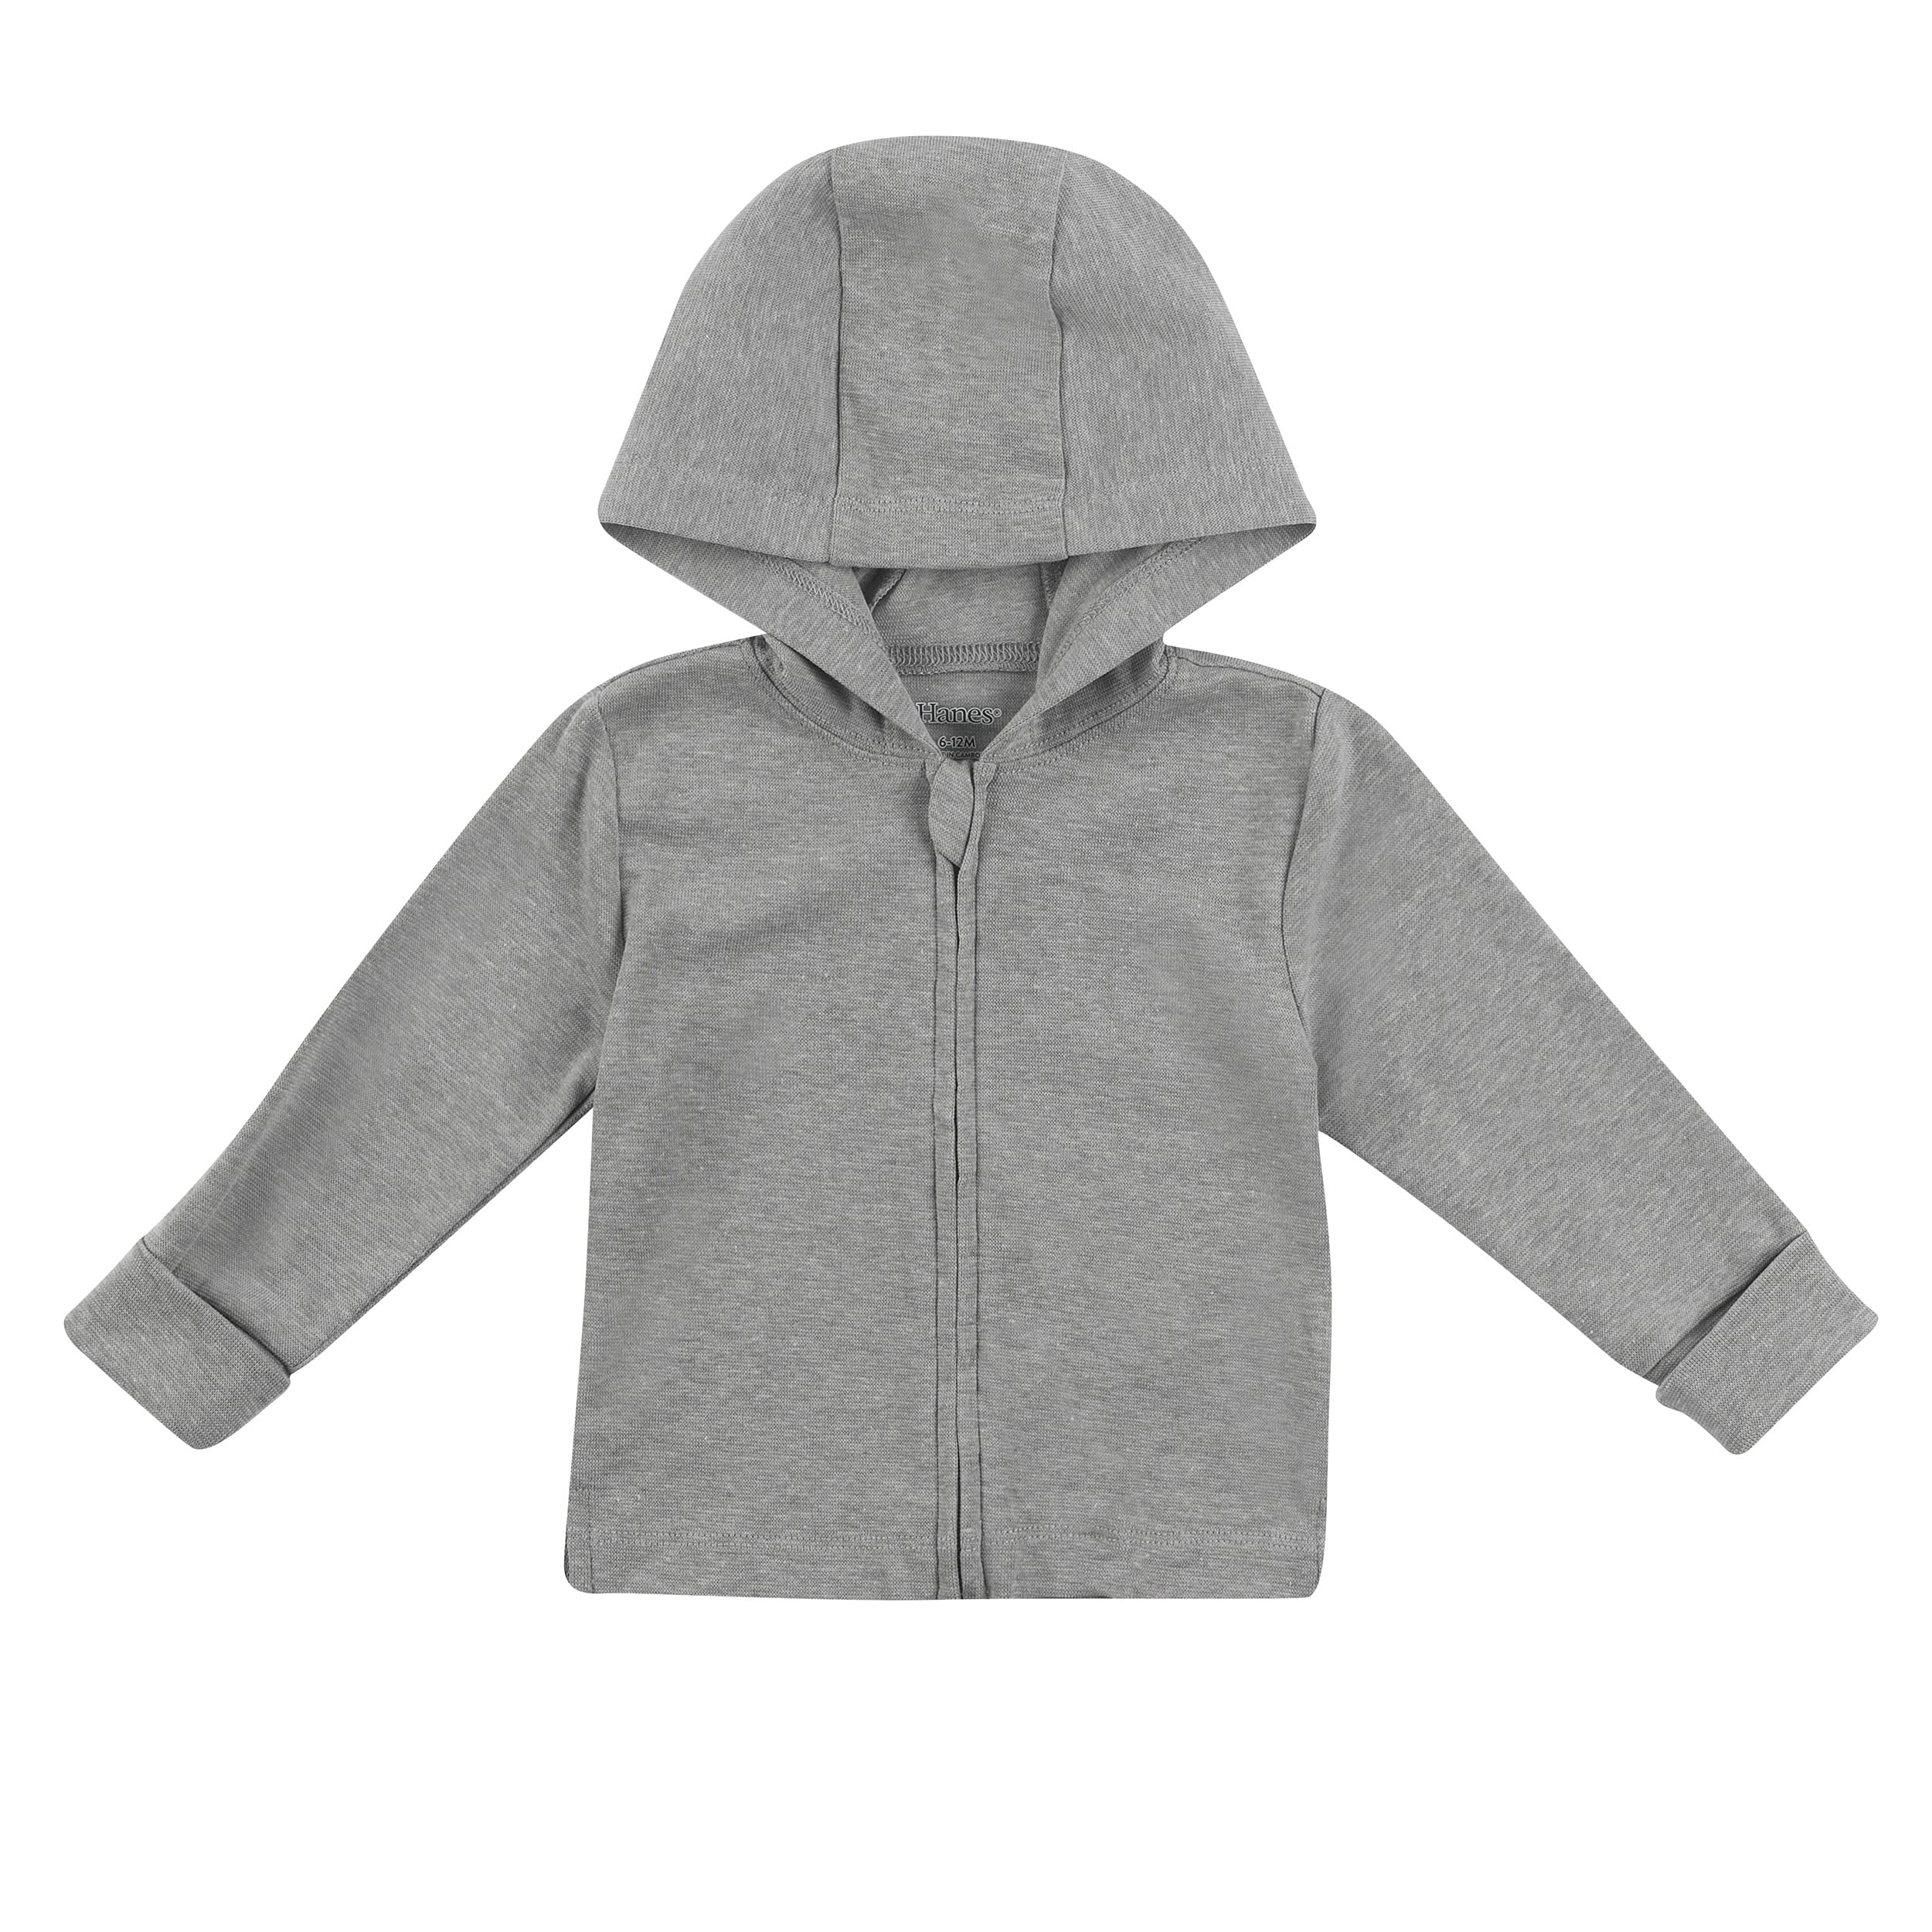 Hanes Hoodie, Zippin Soft 4-Way Stretch Knit Long Sleeve, Babies and Toddlers